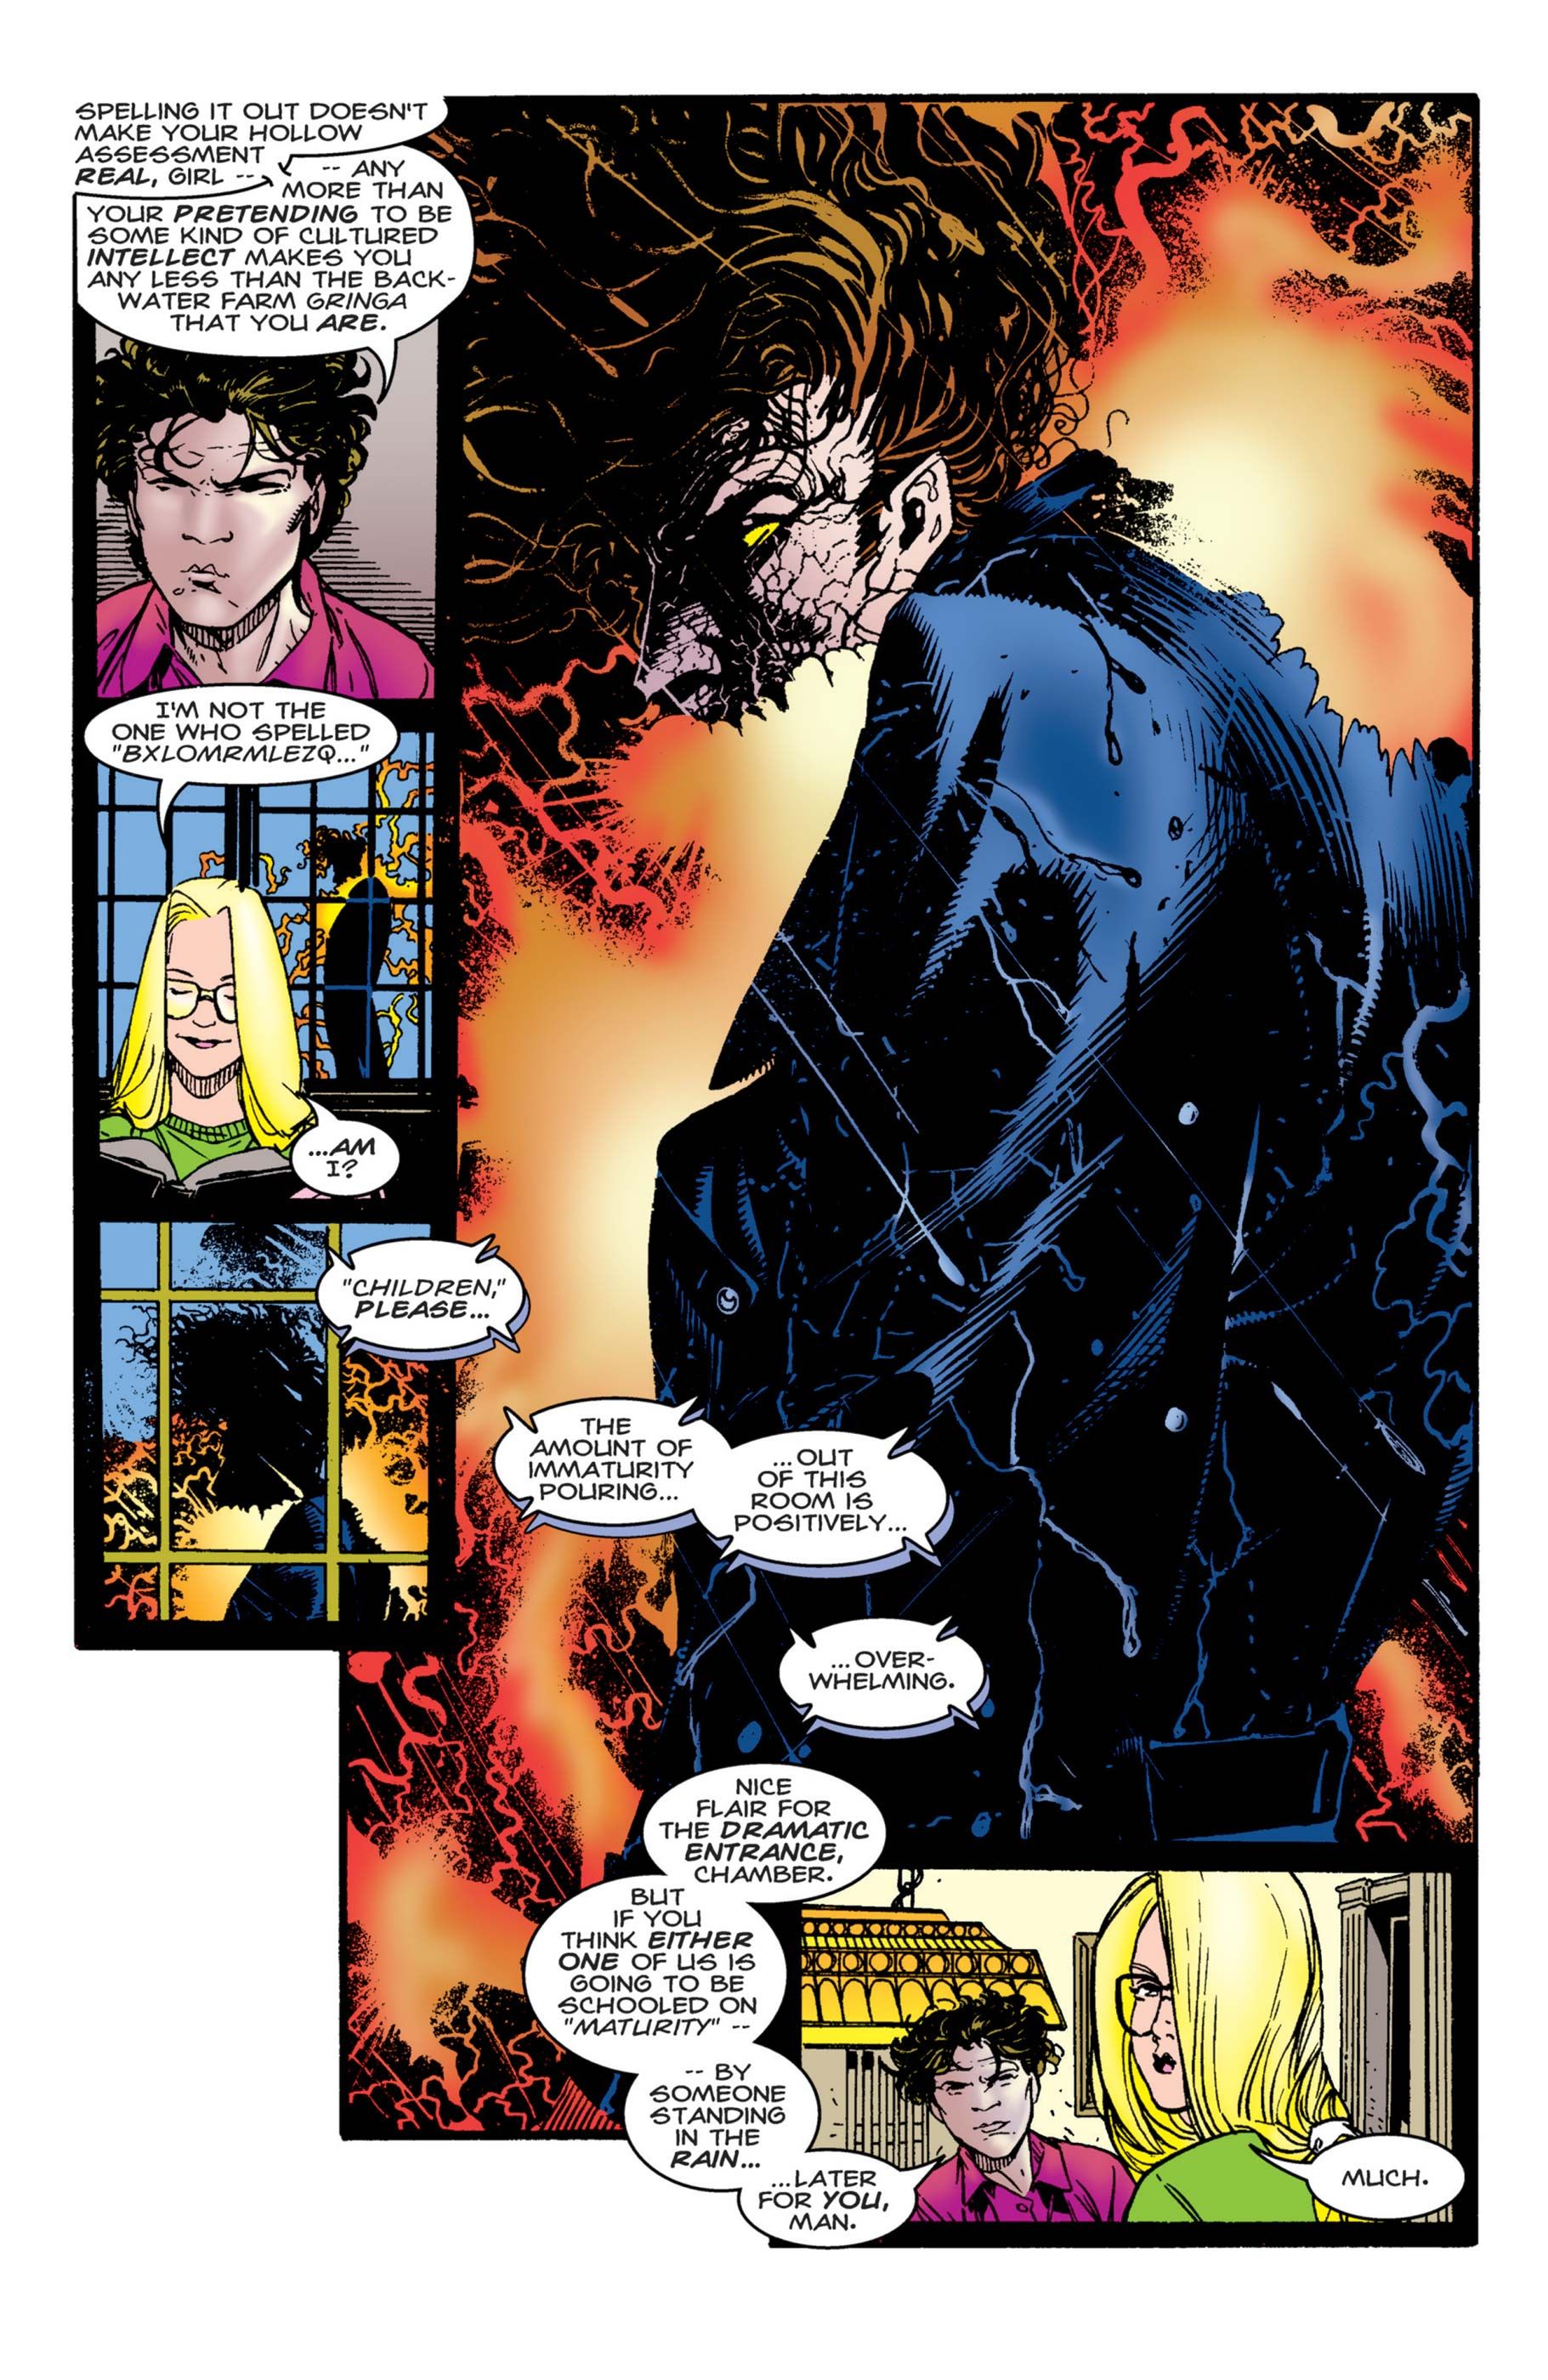 Skin, Husk and Chamber in 1994&#039;s Generation X #2; art by Chris Bachalo, Mark Buckingham and Steve Buccellato